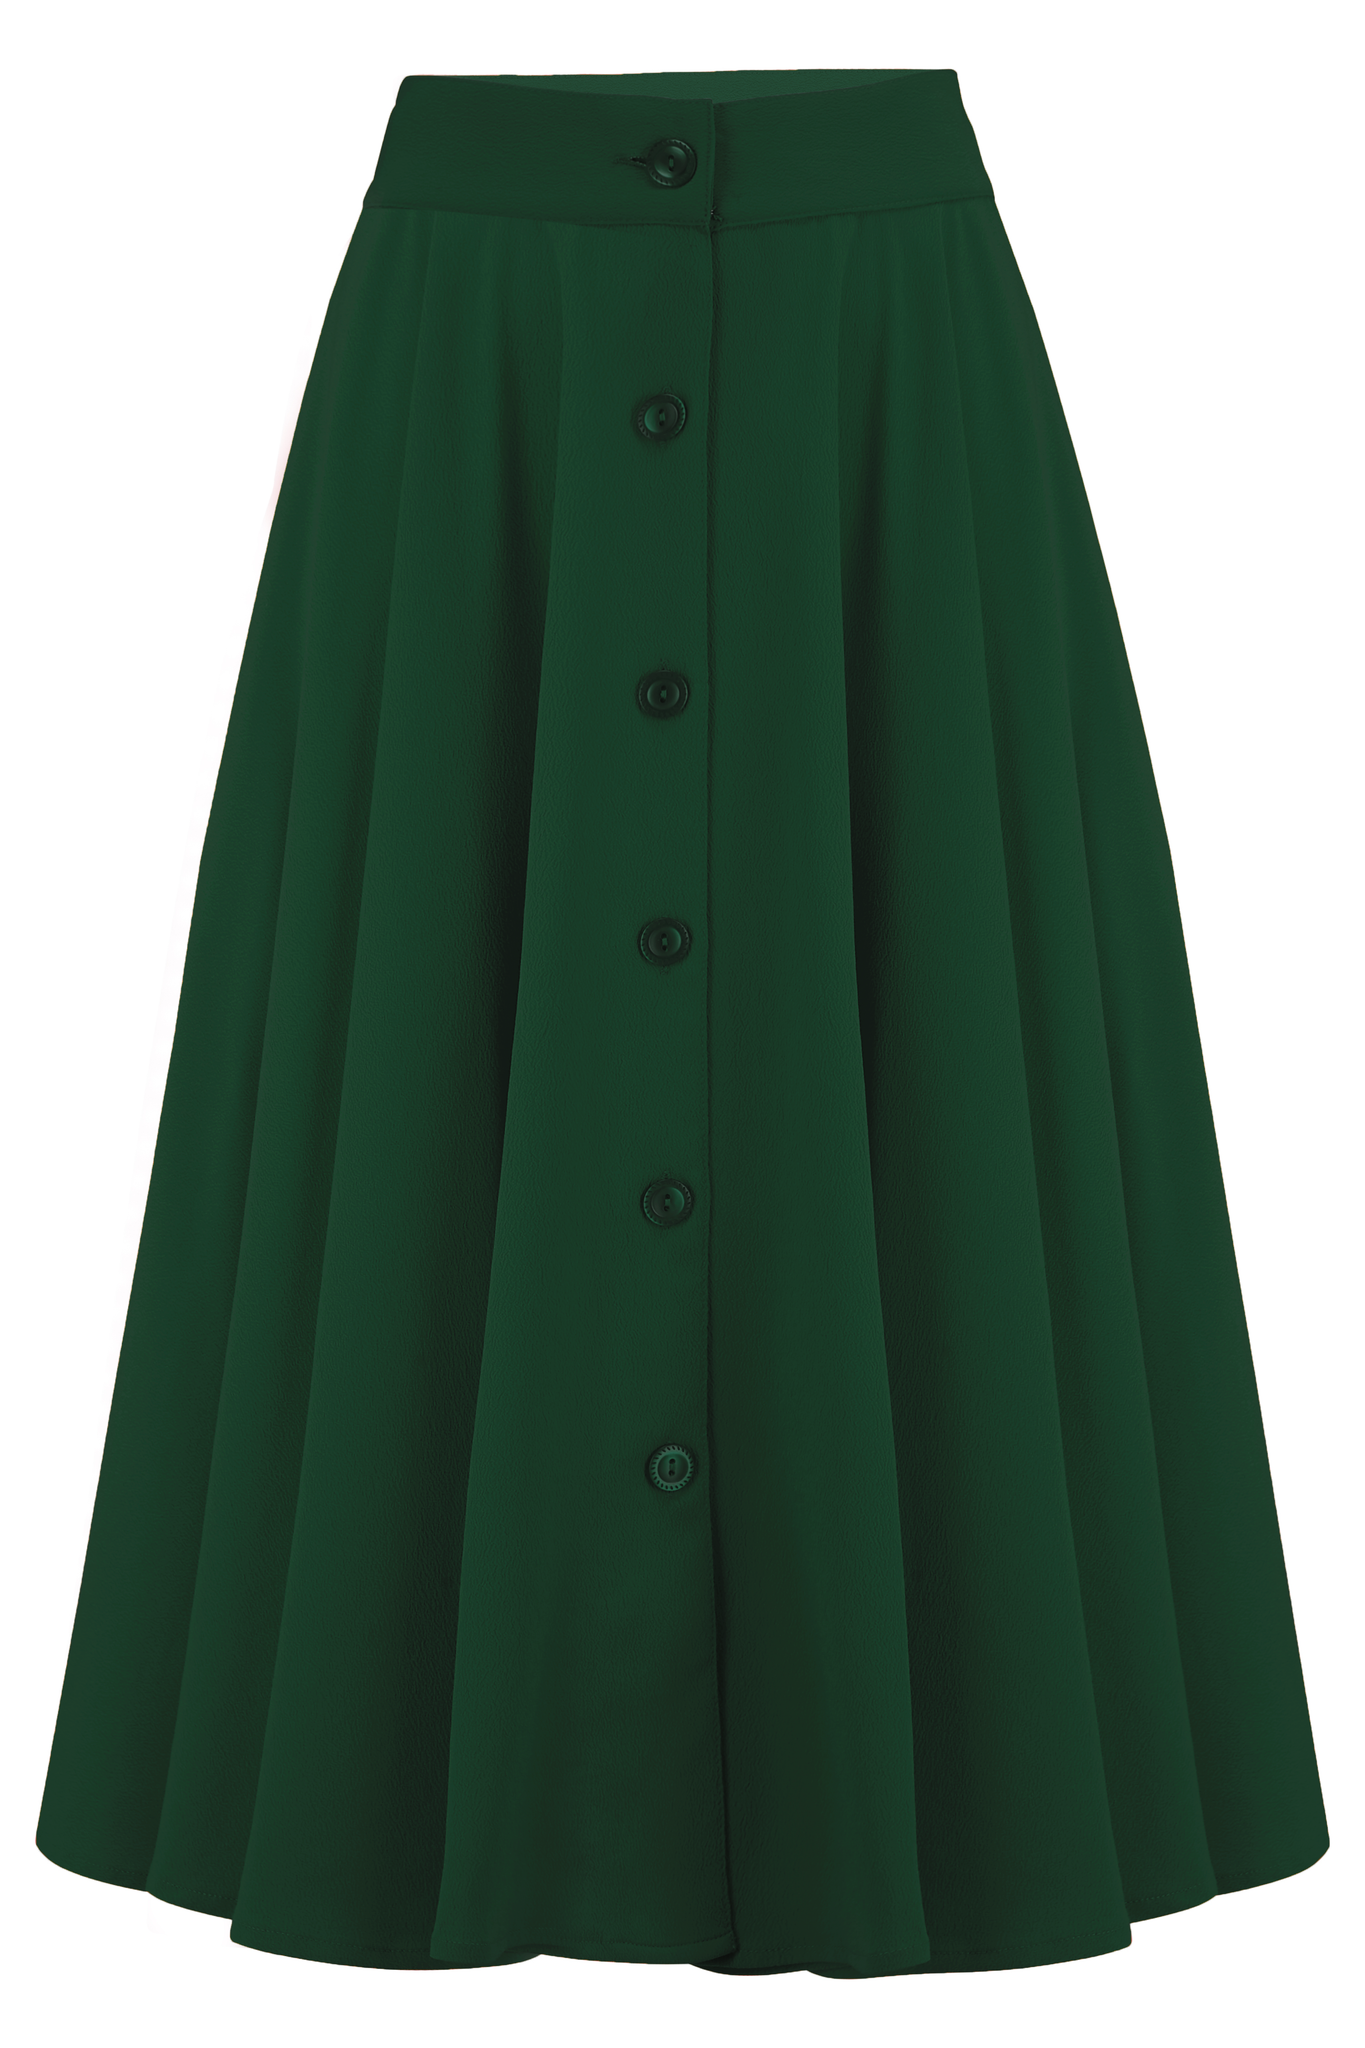 The "Beverly" Button Front Full Circle Skirt with Pockets in Solid Green, Authentic 1950s Vintage Style - True and authentic vintage style clothing, inspired by the Classic styles of CC41 , WW2 and the fun 1950s RocknRoll era, for everyday wear plus events like Goodwood Revival, Twinwood Festival and Viva Las Vegas Rockabilly Weekend Rock n Romance Rock n Romance